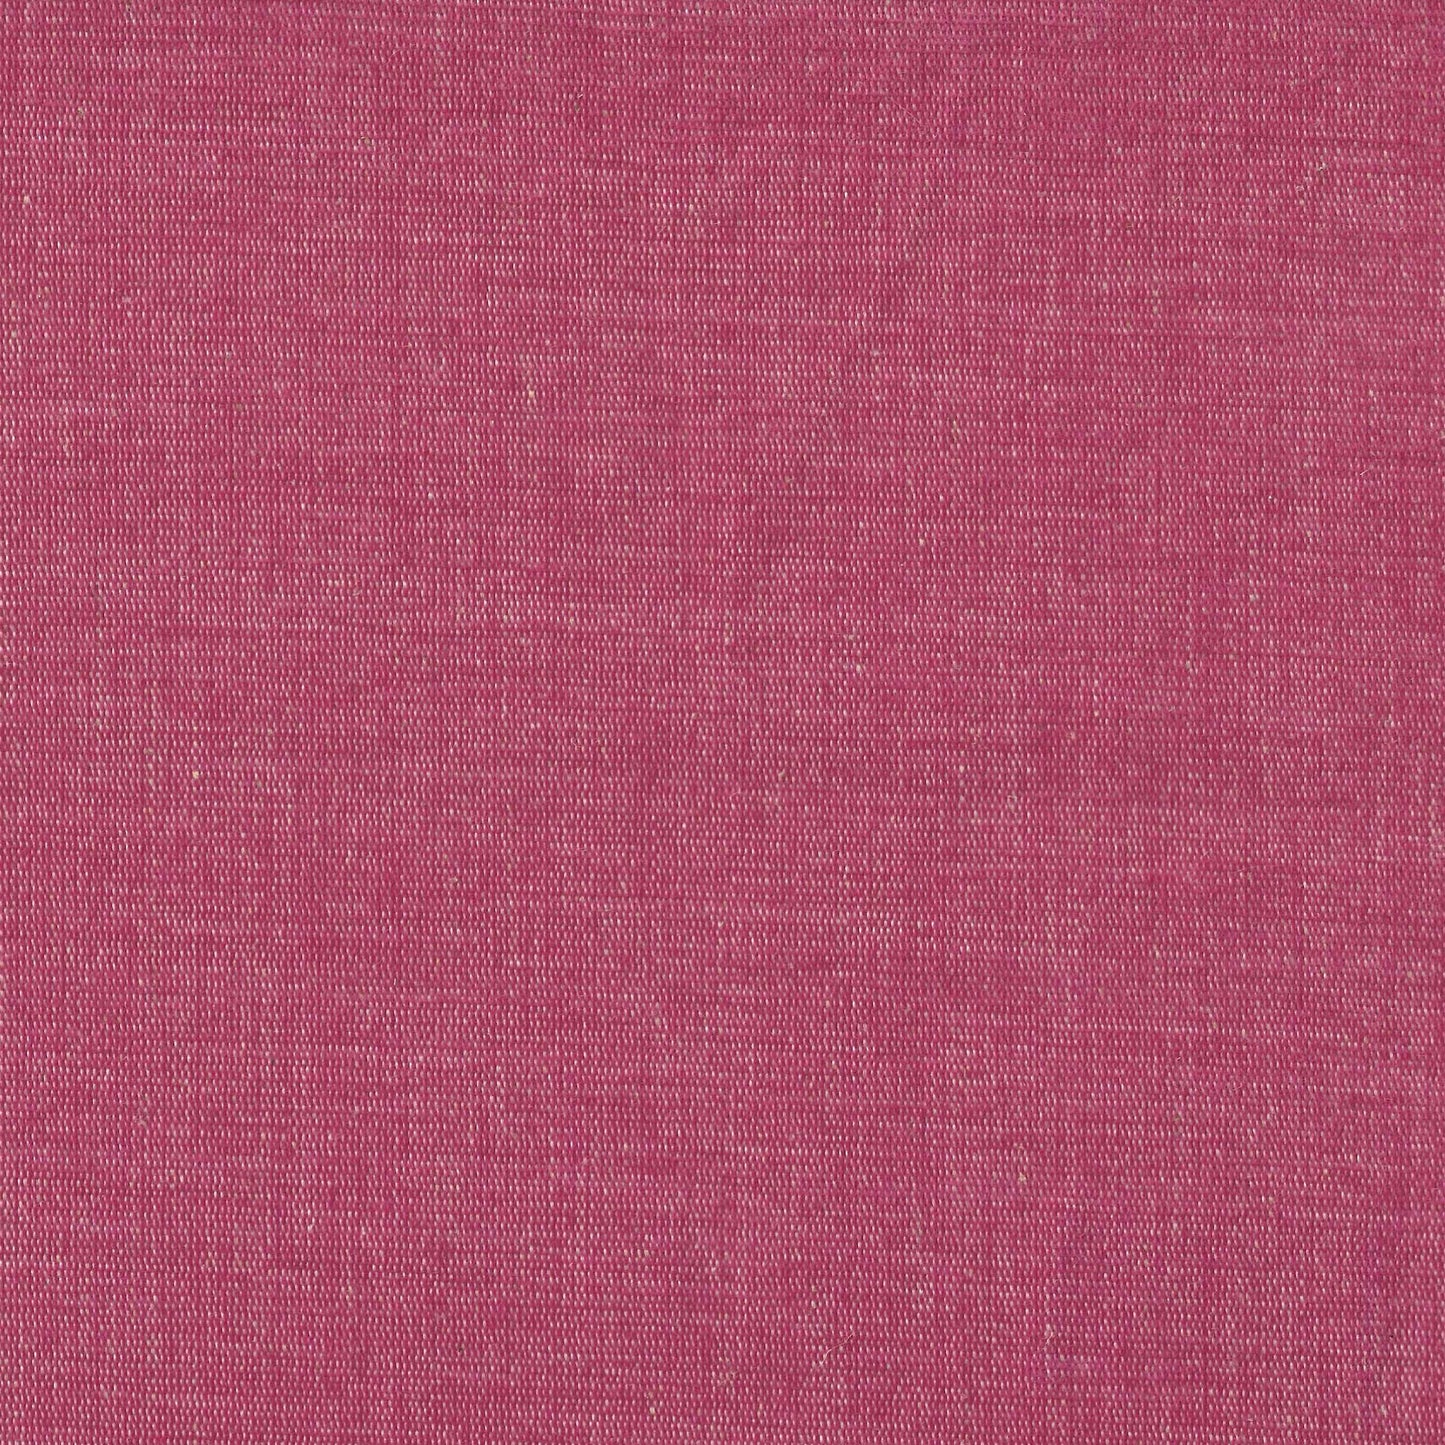 #211 PINK CHENILLE